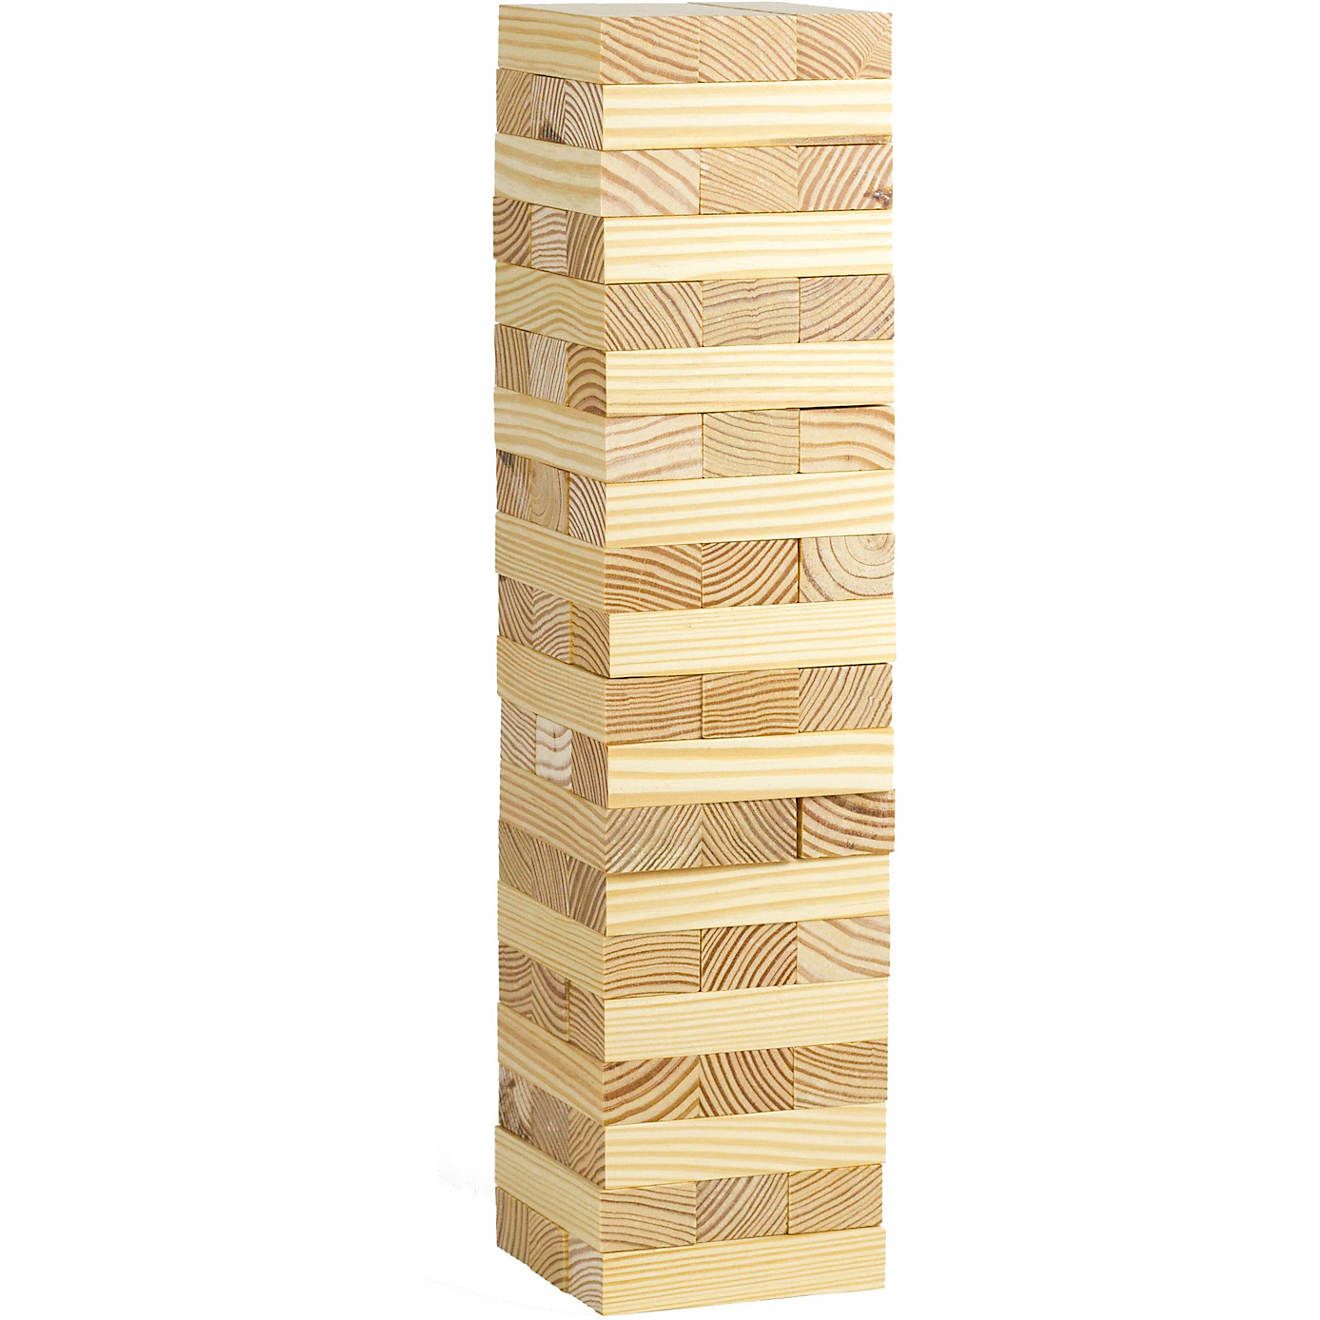 Professor Puzzle Giant Topping Tower | Academy Sports + Outdoor Affiliate